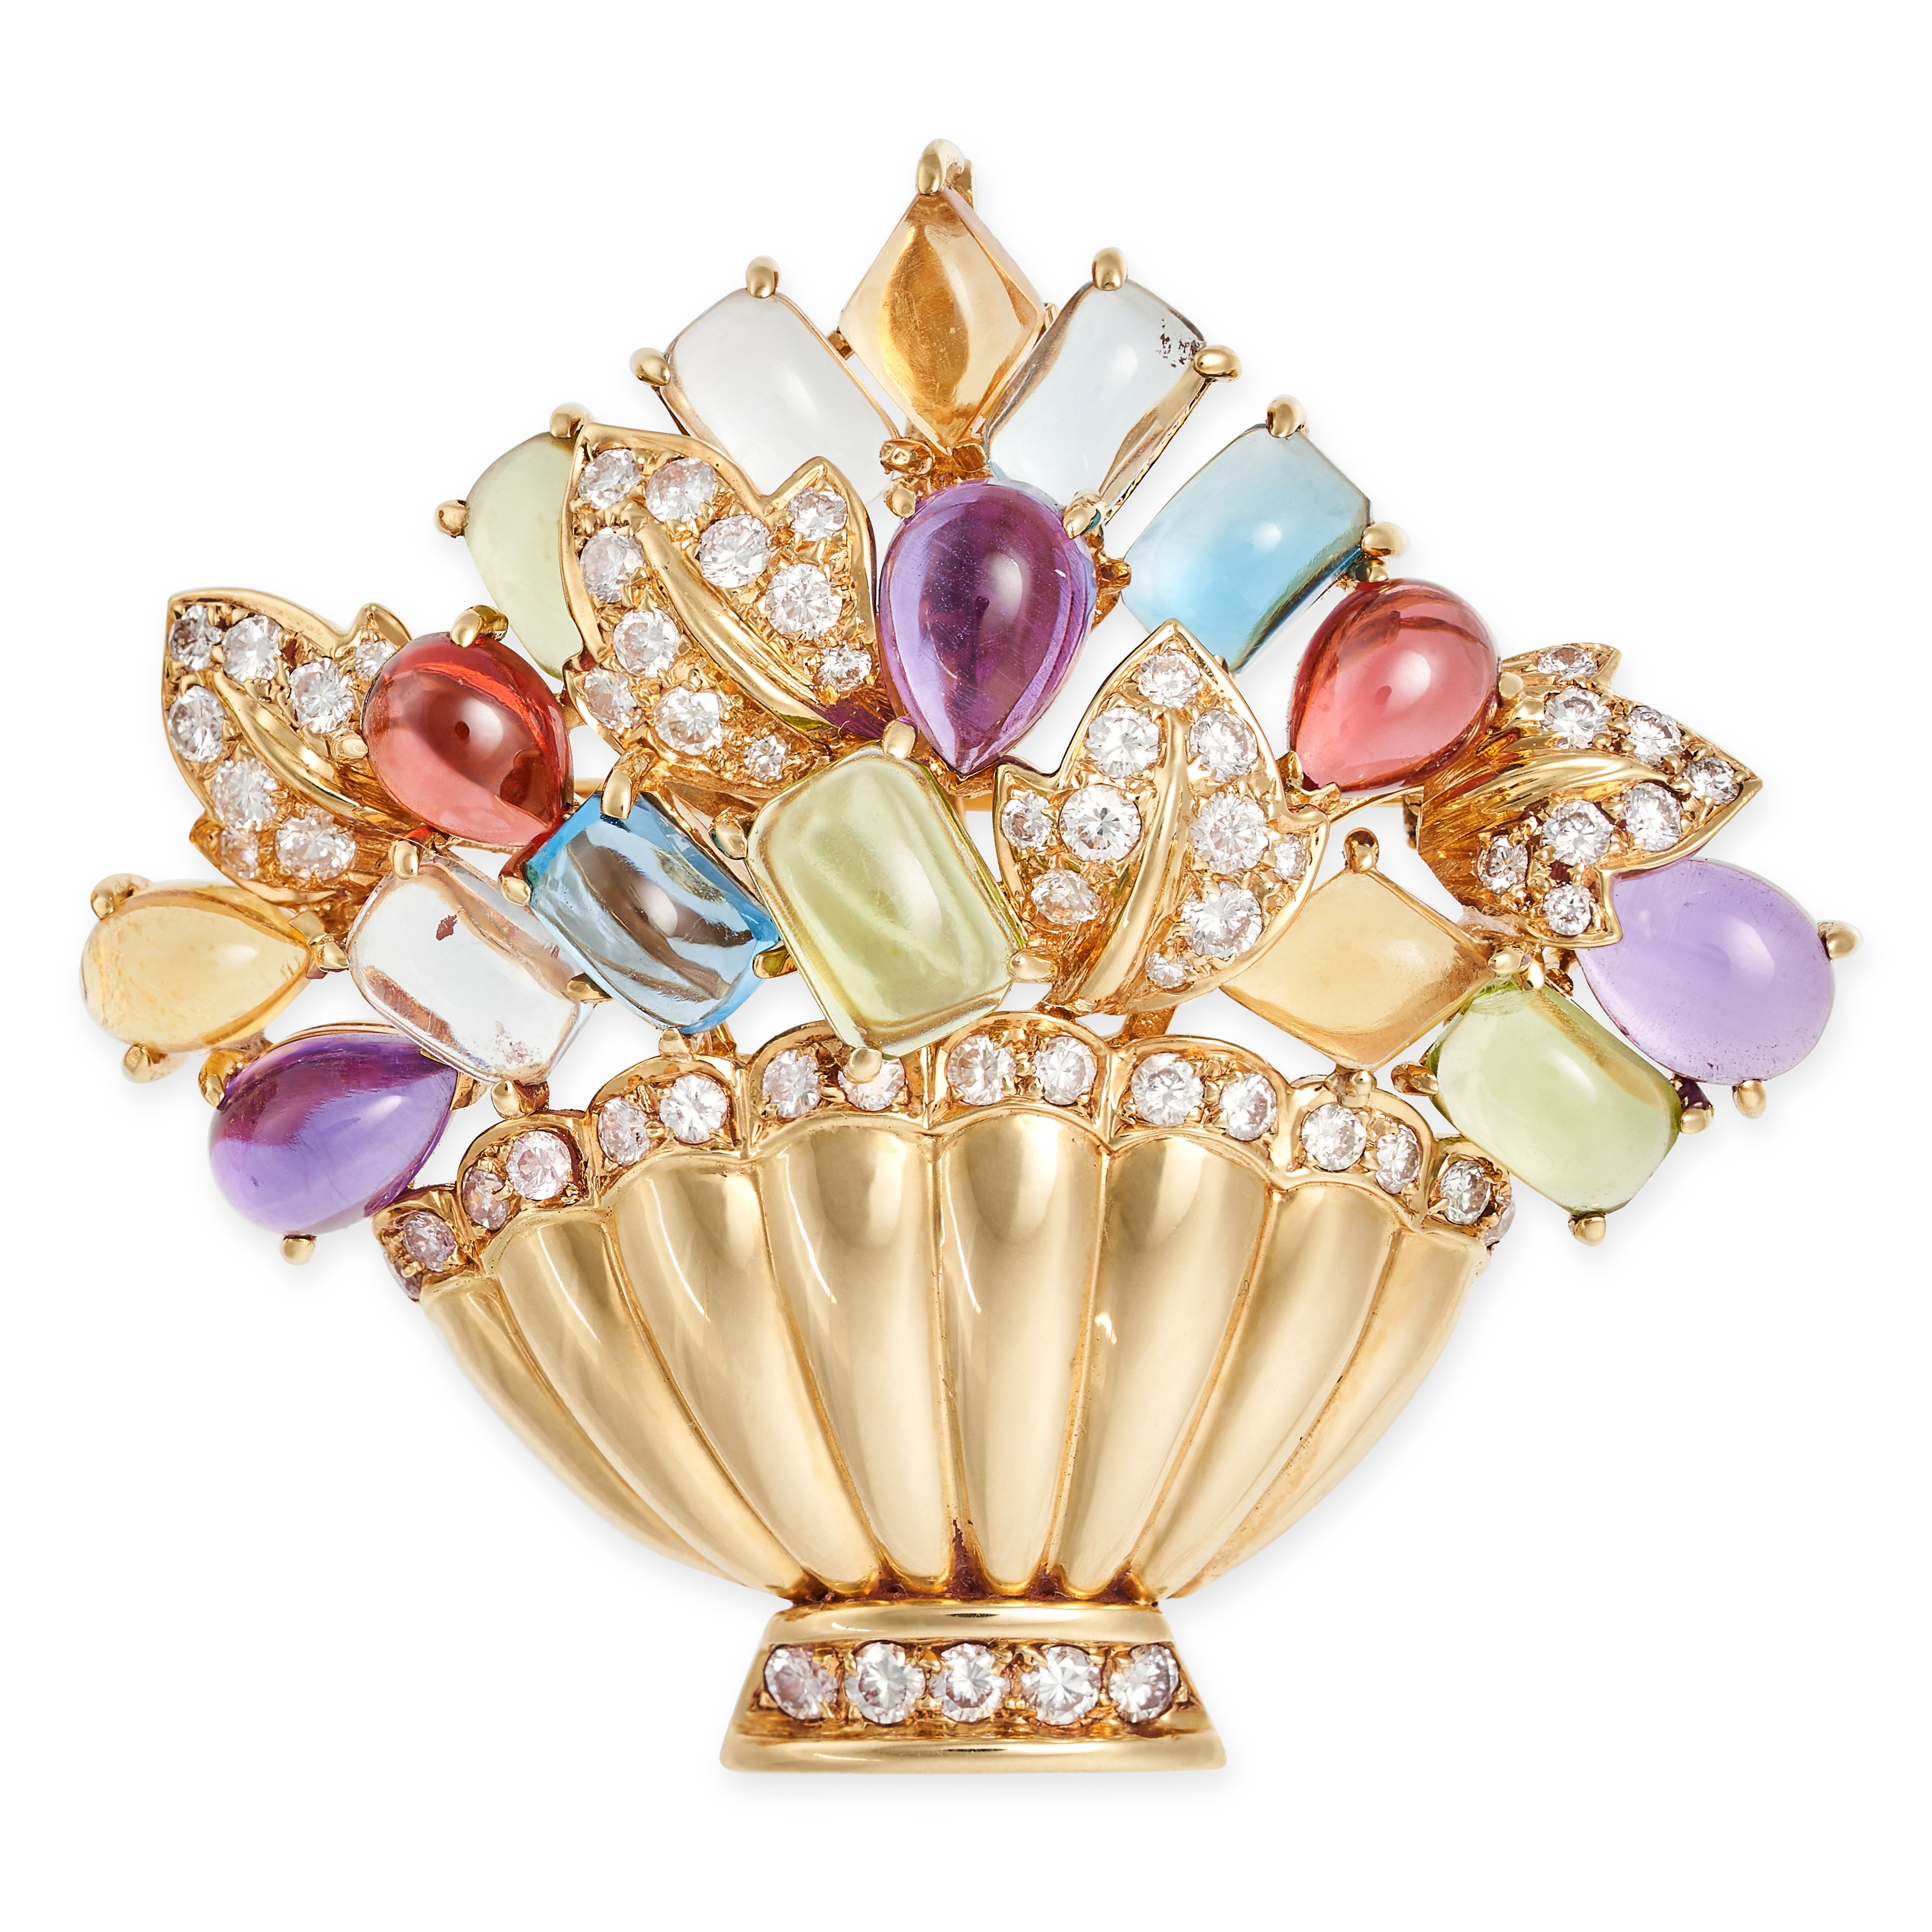 A GEMSET GIARDINETTO BROOCH / PENDANT in 18ct yellow gold, designed as a basket of flowers set wi...